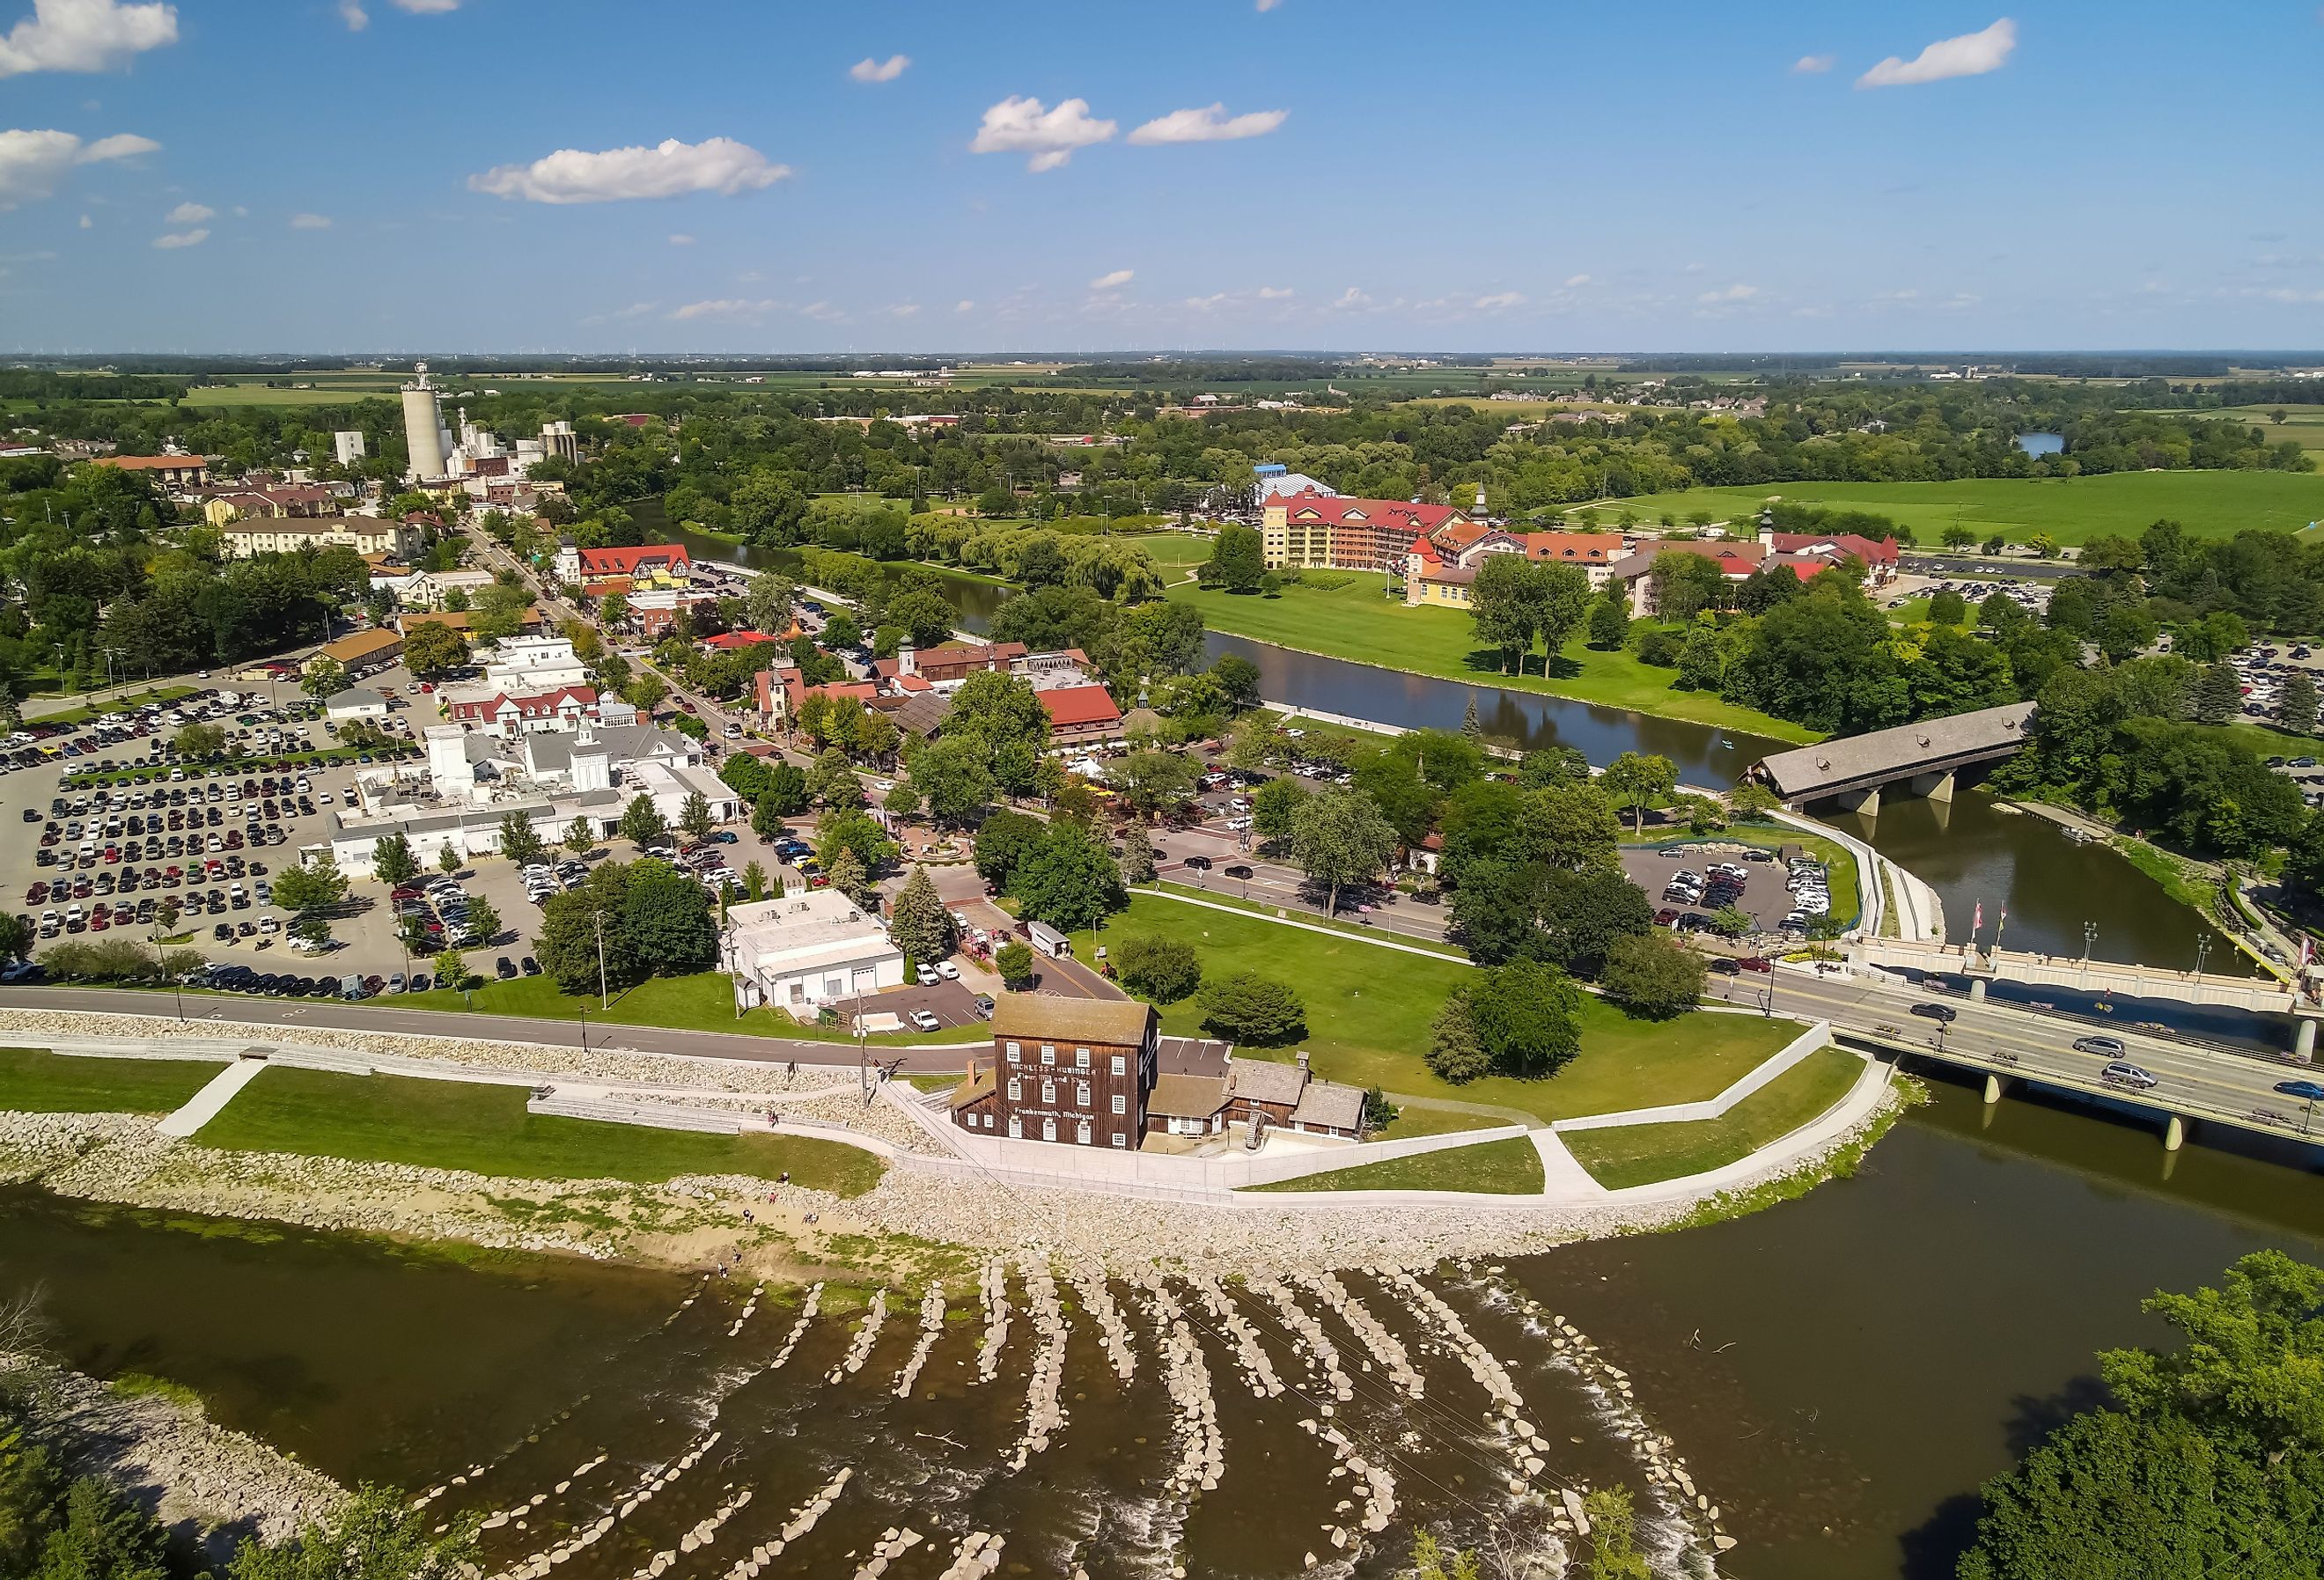 Aerial view of Frankenmuth city in Michigan, known for its Bavarian-style architecture. Image credit SNEHIT PHOTO via Shutterstock